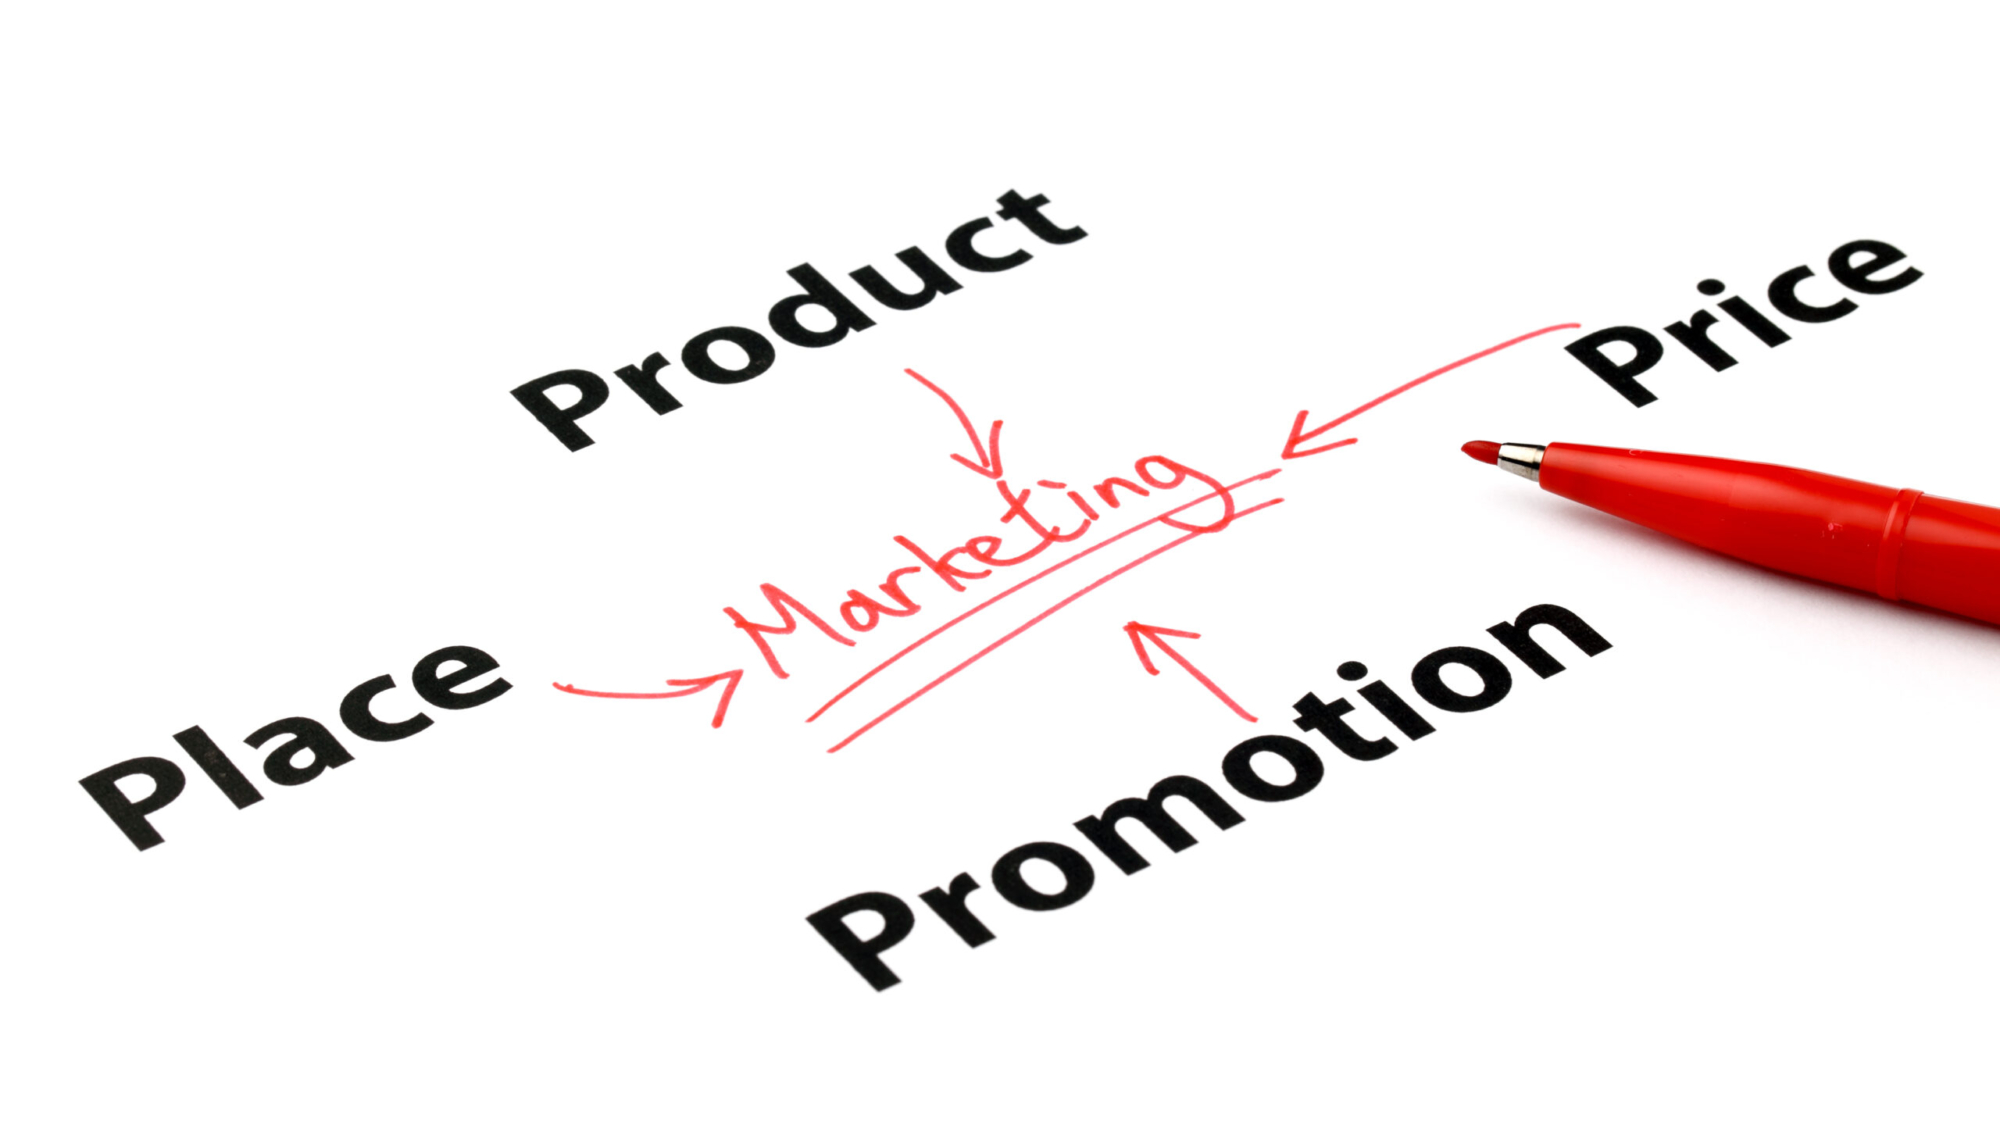 Explore the core concepts of the 4Ps of Marketing with Gott Marketing. Dive into the strategies behind Product, Price, Place, and Promotion, and learn how these principles can shape your marketing success.